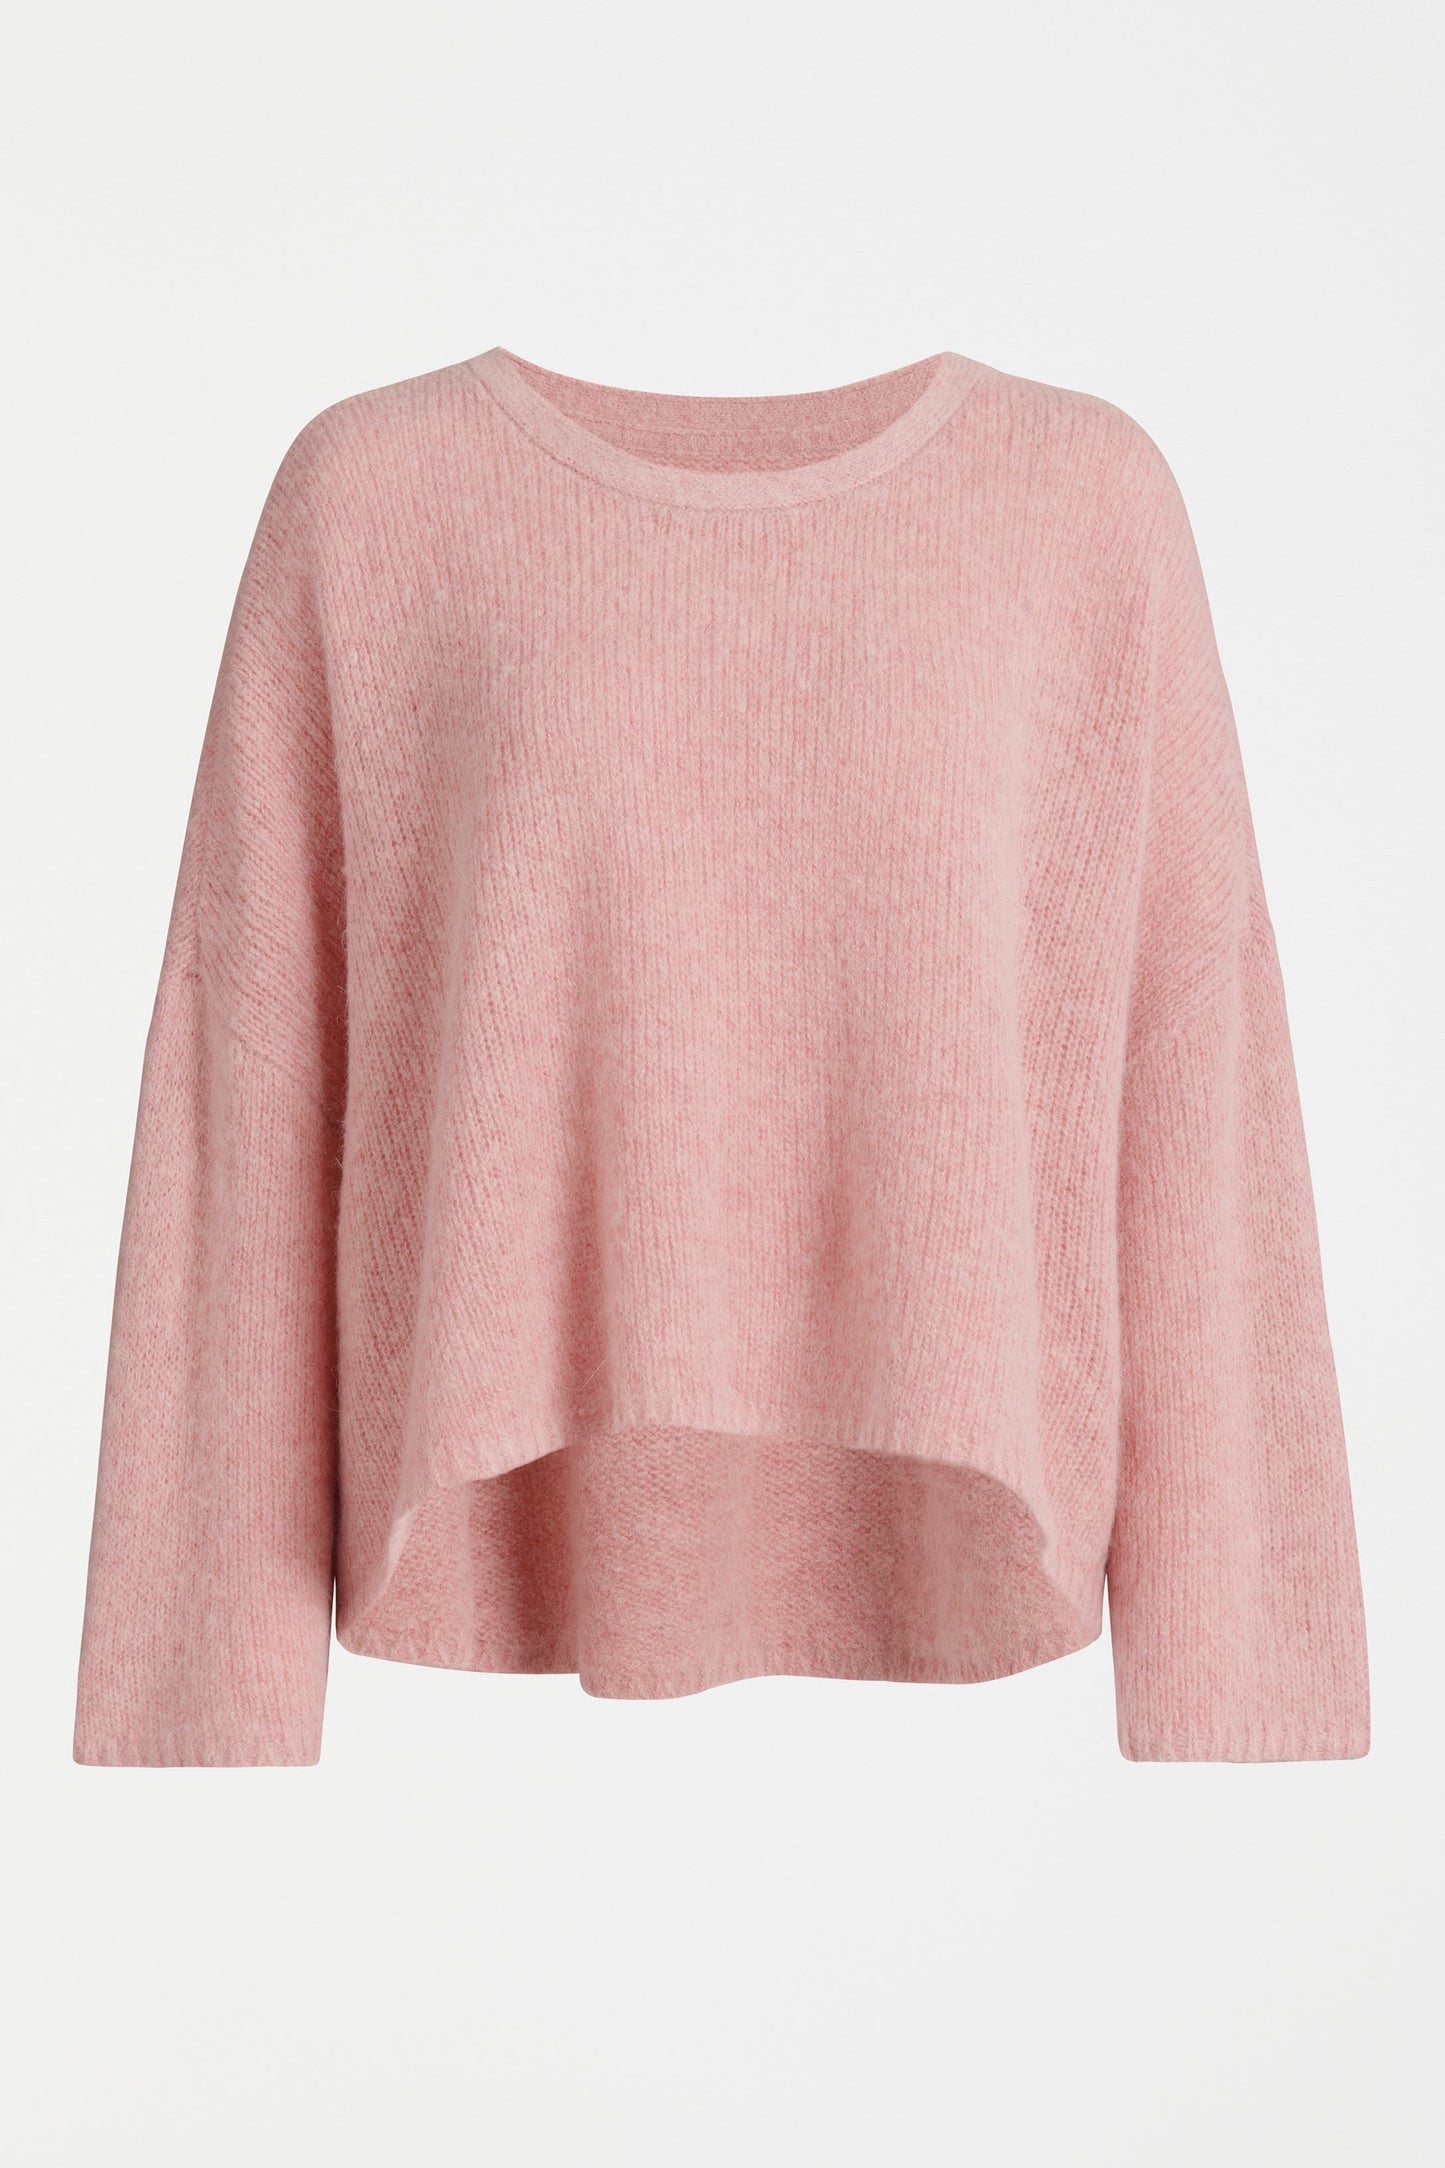 Agna Relaxed Box Fit Alpaca Yarn Knit Sweater Model Front | PINK SALT